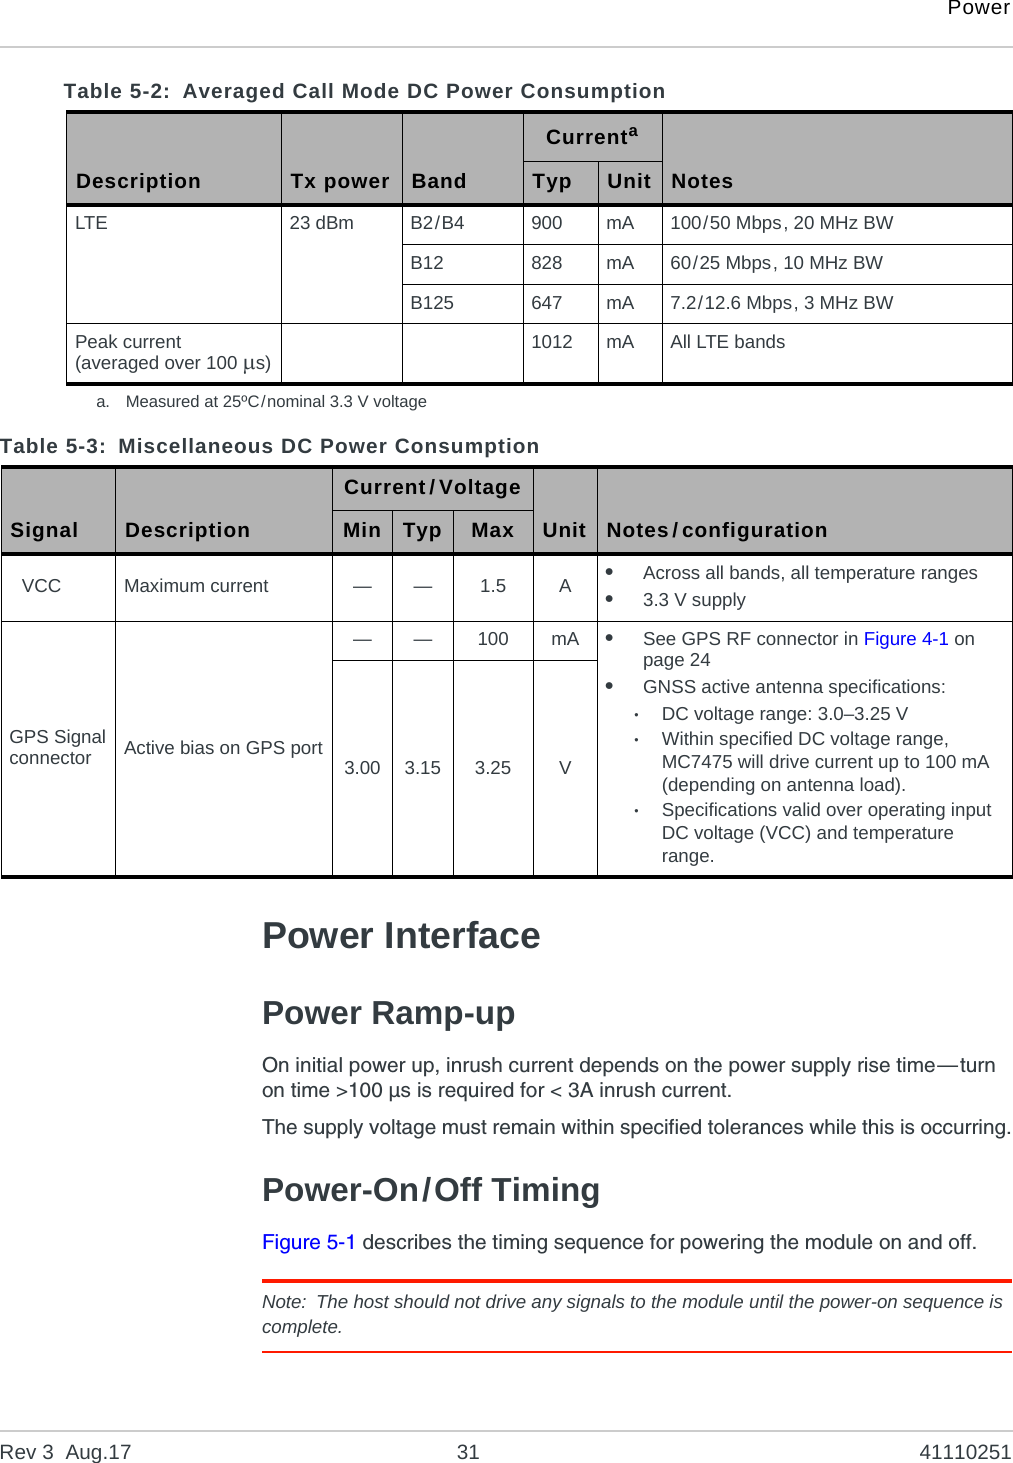 PowerRev 3  Aug.17 31 41110251Power InterfacePower Ramp-upOn initial power up, inrush current depends on the power supply rise time—turn on time &gt;100 µs is required for &lt; 3A inrush current.The supply voltage must remain within specified tolerances while this is occurring.Power-On/Off TimingFigure 5-1 describes the timing sequence for powering the module on and off.Note: The host should not drive any signals to the module until the power-on sequence is complete.Table 5-2: Averaged Call Mode DC Power ConsumptionDescription Tx power BandCurrentaNotesTyp UnitLTE 23 dBm B2/B4 900 mA 100/50 Mbps, 20 MHz BWB12 828 mA 60/25 Mbps, 10 MHz BWB125 647 mA 7.2/12.6 Mbps, 3 MHz BWPeak current(averaged over 100 s) 1012 mA All LTE bandsa. Measured at 25ºC/nominal 3.3 V voltageTable 5-3: Miscellaneous DC Power ConsumptionSignal DescriptionCurrent/VoltageUnit Notes/configurationMin Typ MaxVCC Maximum current — — 1.5 A•Across all bands, all temperature ranges•3.3 V supplyGPS Signalconnector Active bias on GPS port— — 100 mA •See GPS RF connector in Figure 4-1 on page 24•GNSS active antenna specifications:·DC voltage range: 3.0–3.25 V·Within specified DC voltage range, MC7475 will drive current up to 100 mA (depending on antenna load).·Specifications valid over operating input DC voltage (VCC) and temperature range.3.00 3.15 3.25 V